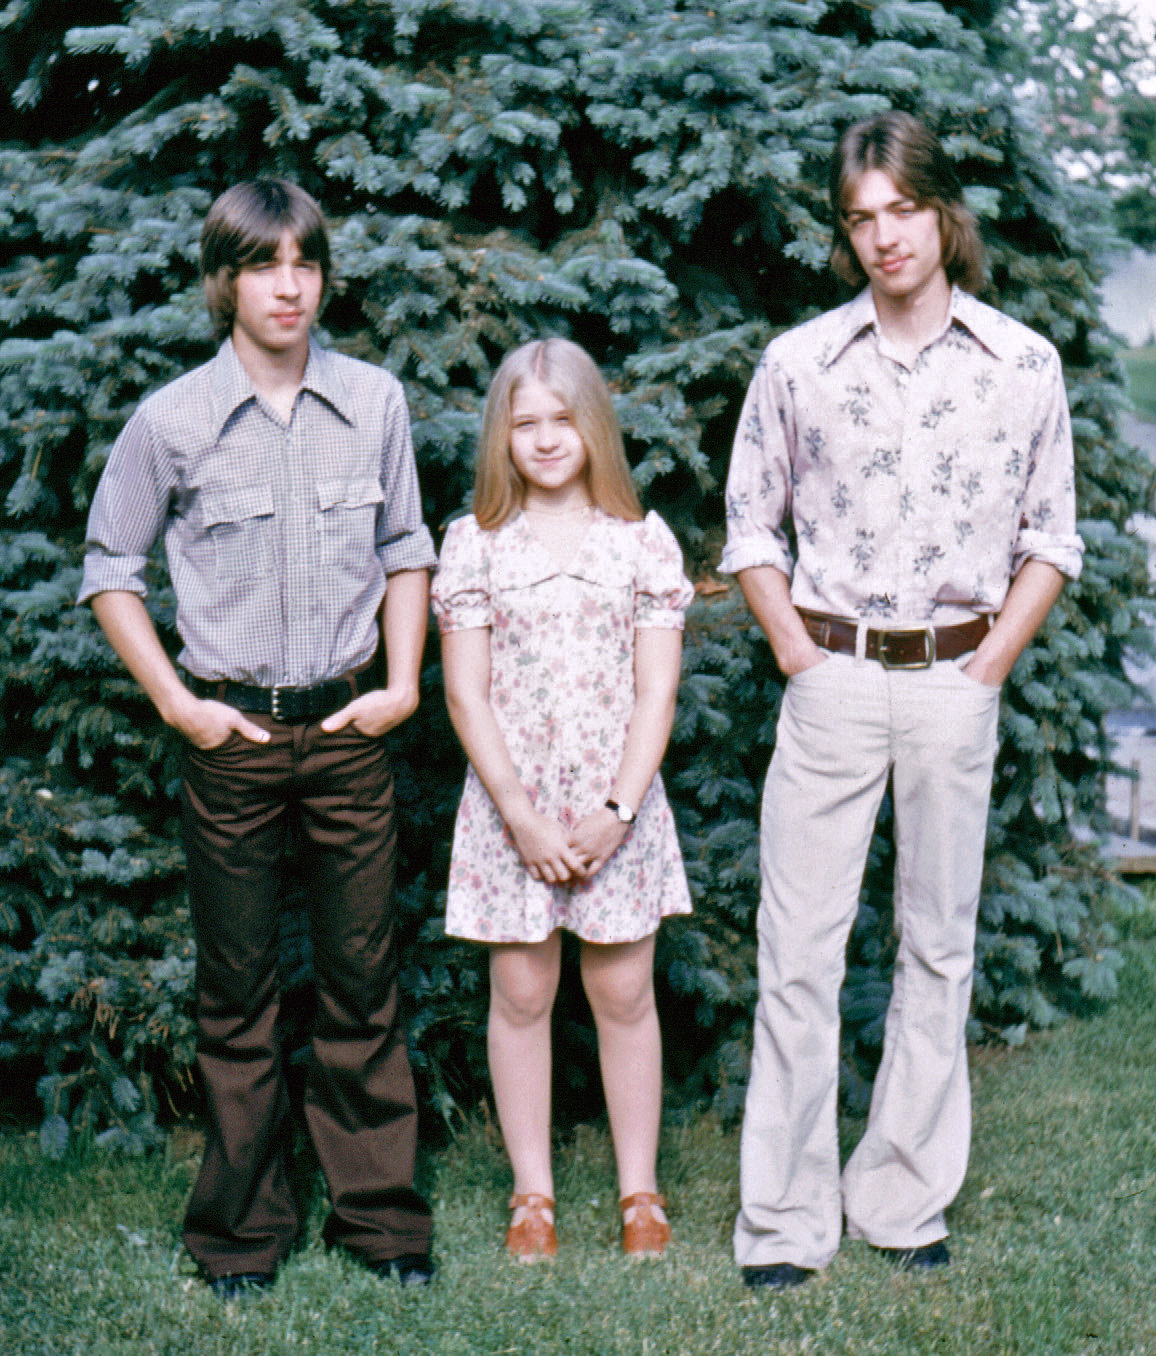 My siblings, about 1975. Picture taken in our front yard in Ohio. View full size.